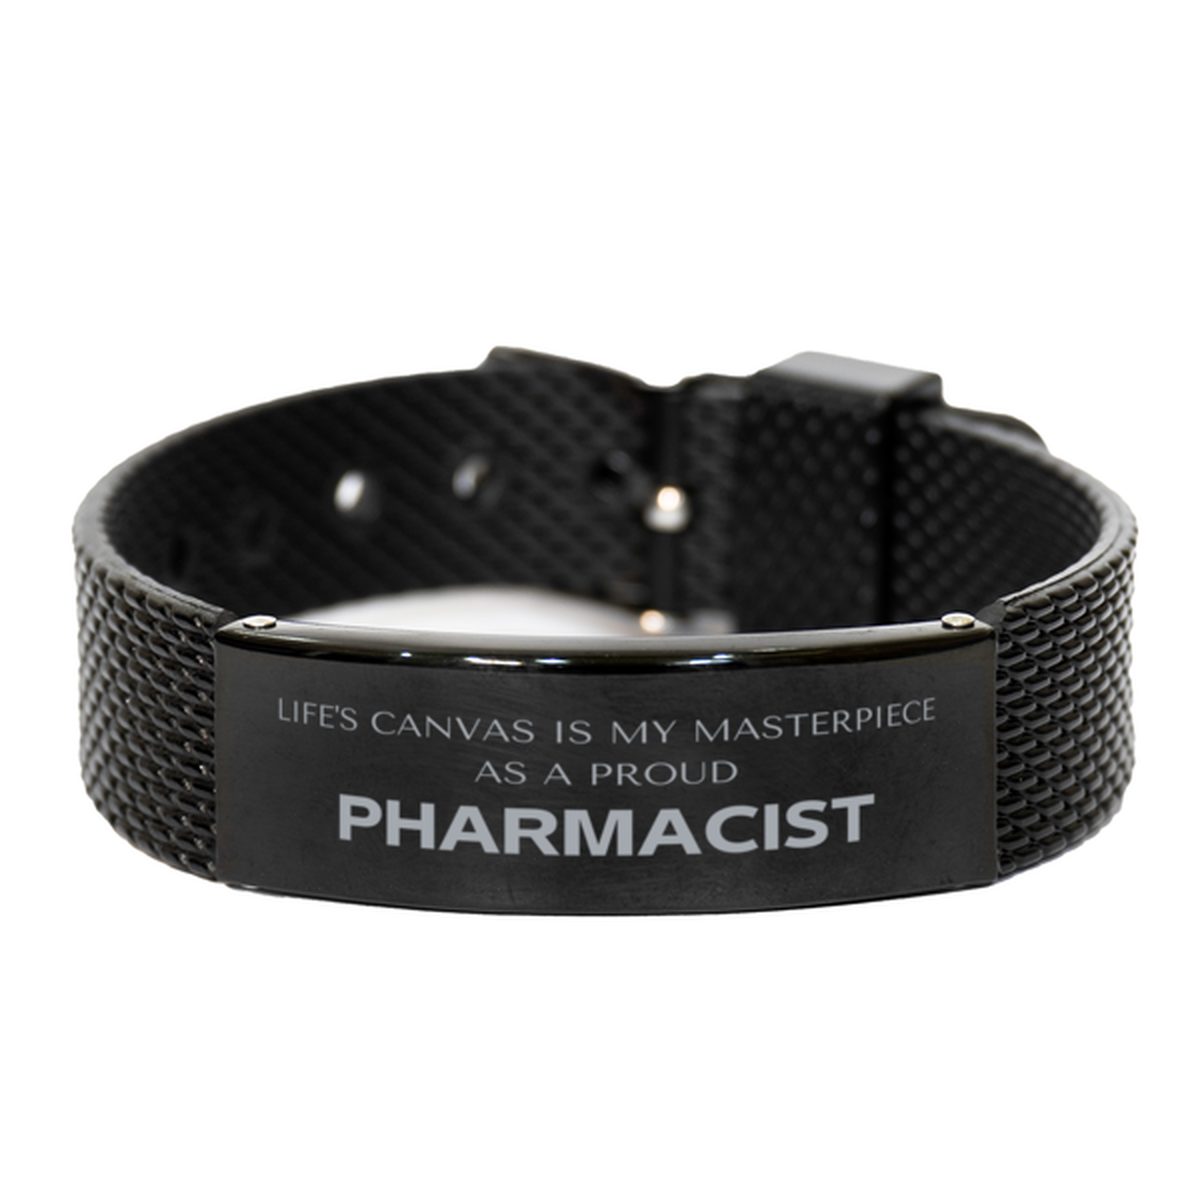 Proud Pharmacist Gifts, Life's canvas is my masterpiece, Epic Birthday Christmas Unique Black Shark Mesh Bracelet For Pharmacist, Coworkers, Men, Women, Friends